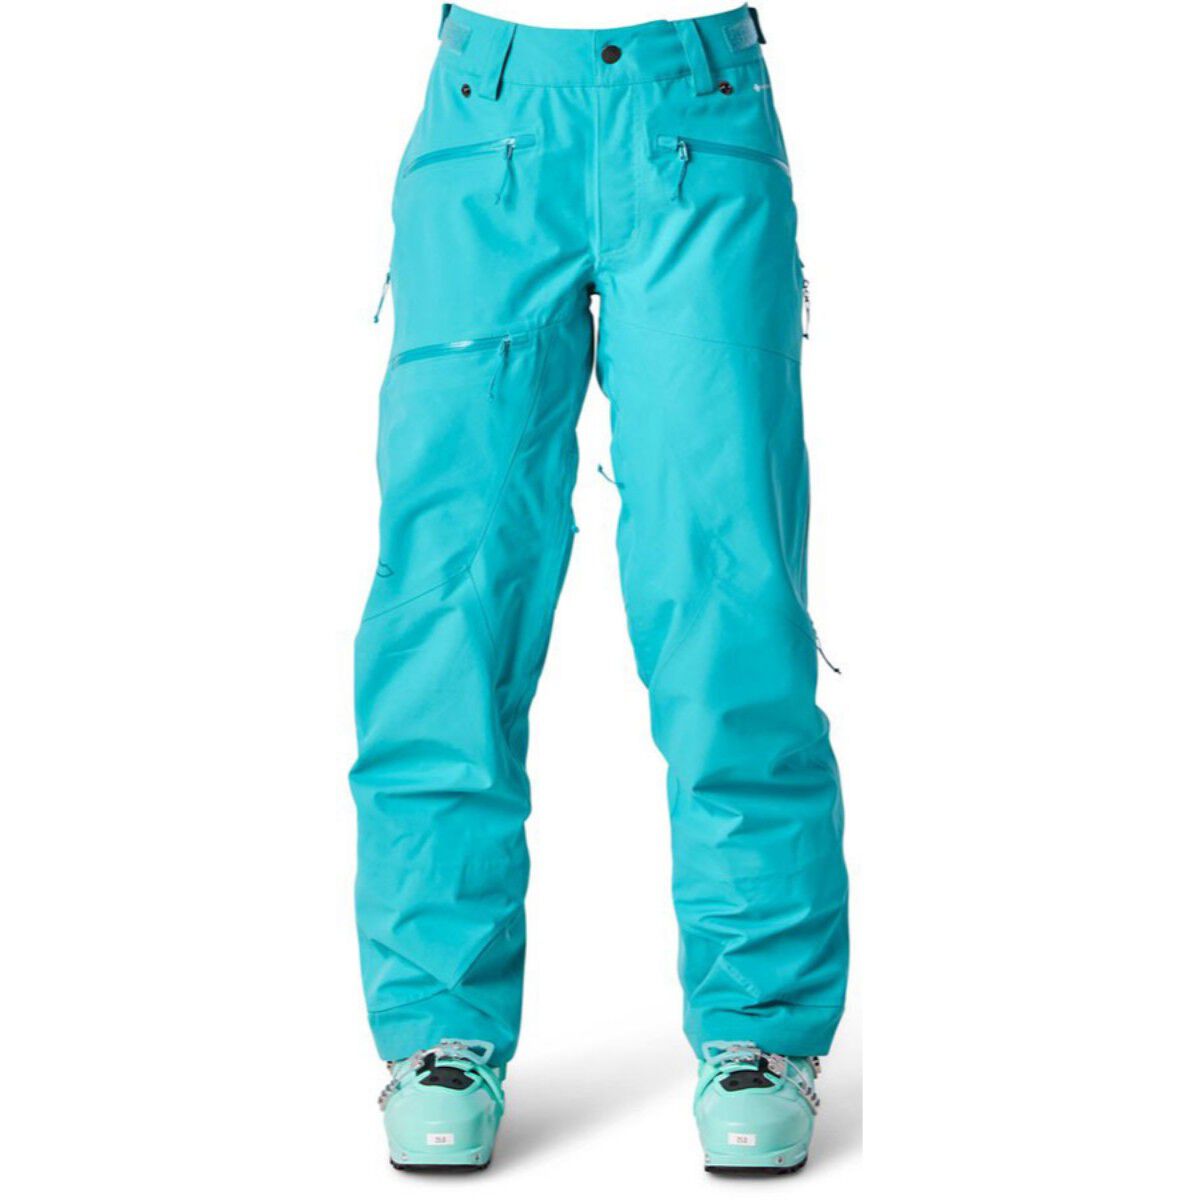 Flylow Jackets, Pants, Gloves and Gear - Men's and Women's 